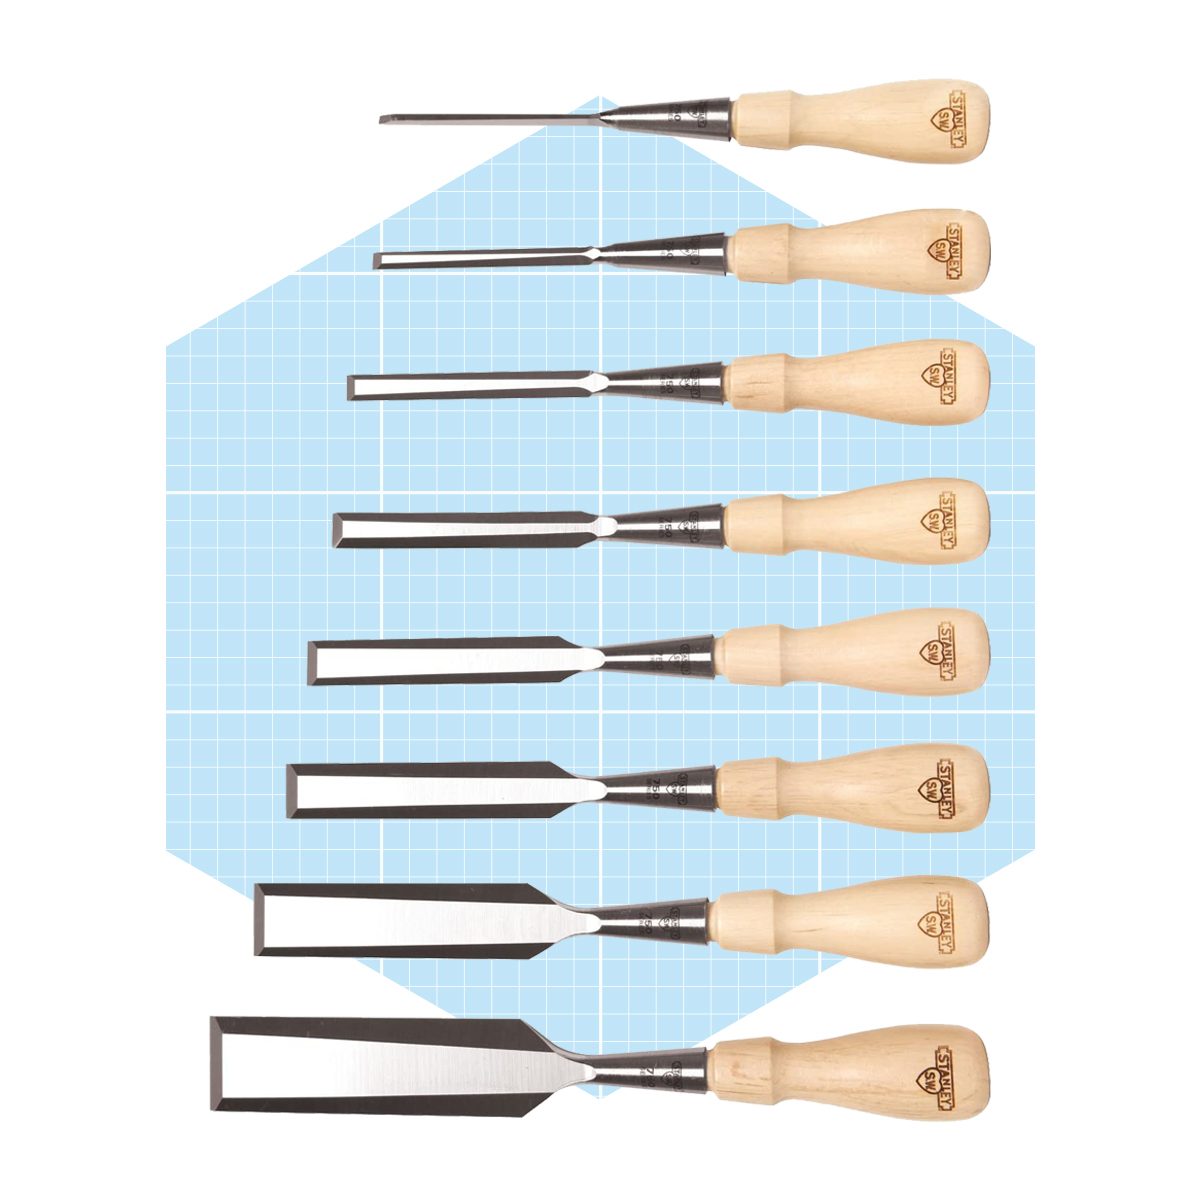 6 Best Chisels For Woodworking  What Is The Best Chisel Brand? Buy Chisels  Online 